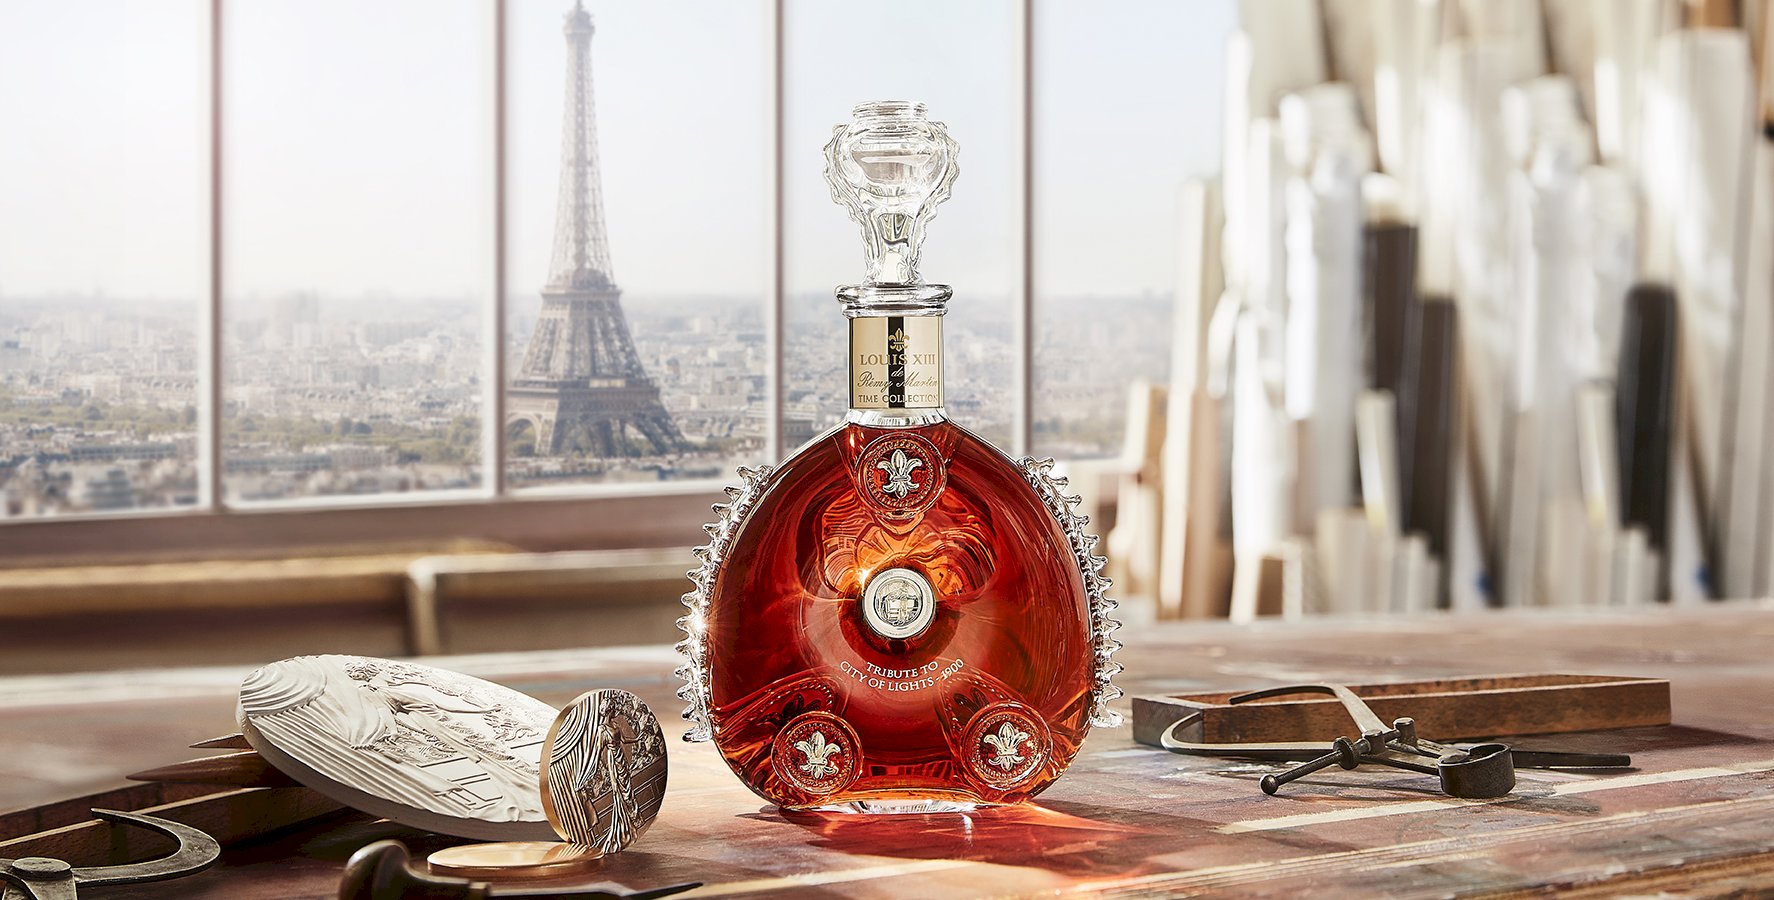 Introduction to Rémy Martin Louis XIII Visit & Tasting in Cognac